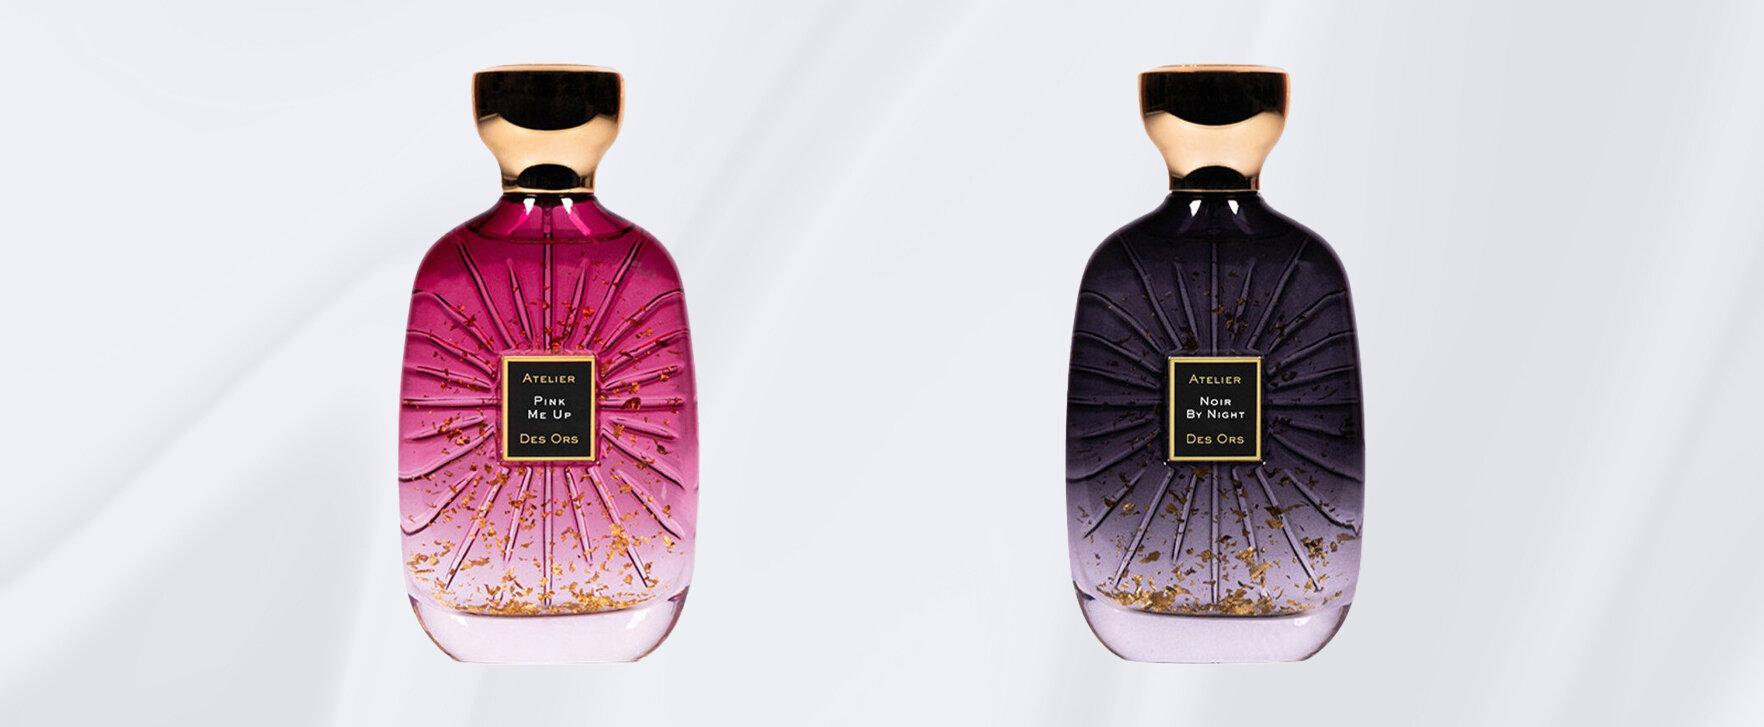 “Pink Me Up” and “Noir by Night” - Fragrance Label Atelier Des Ors Presents New Perfumes